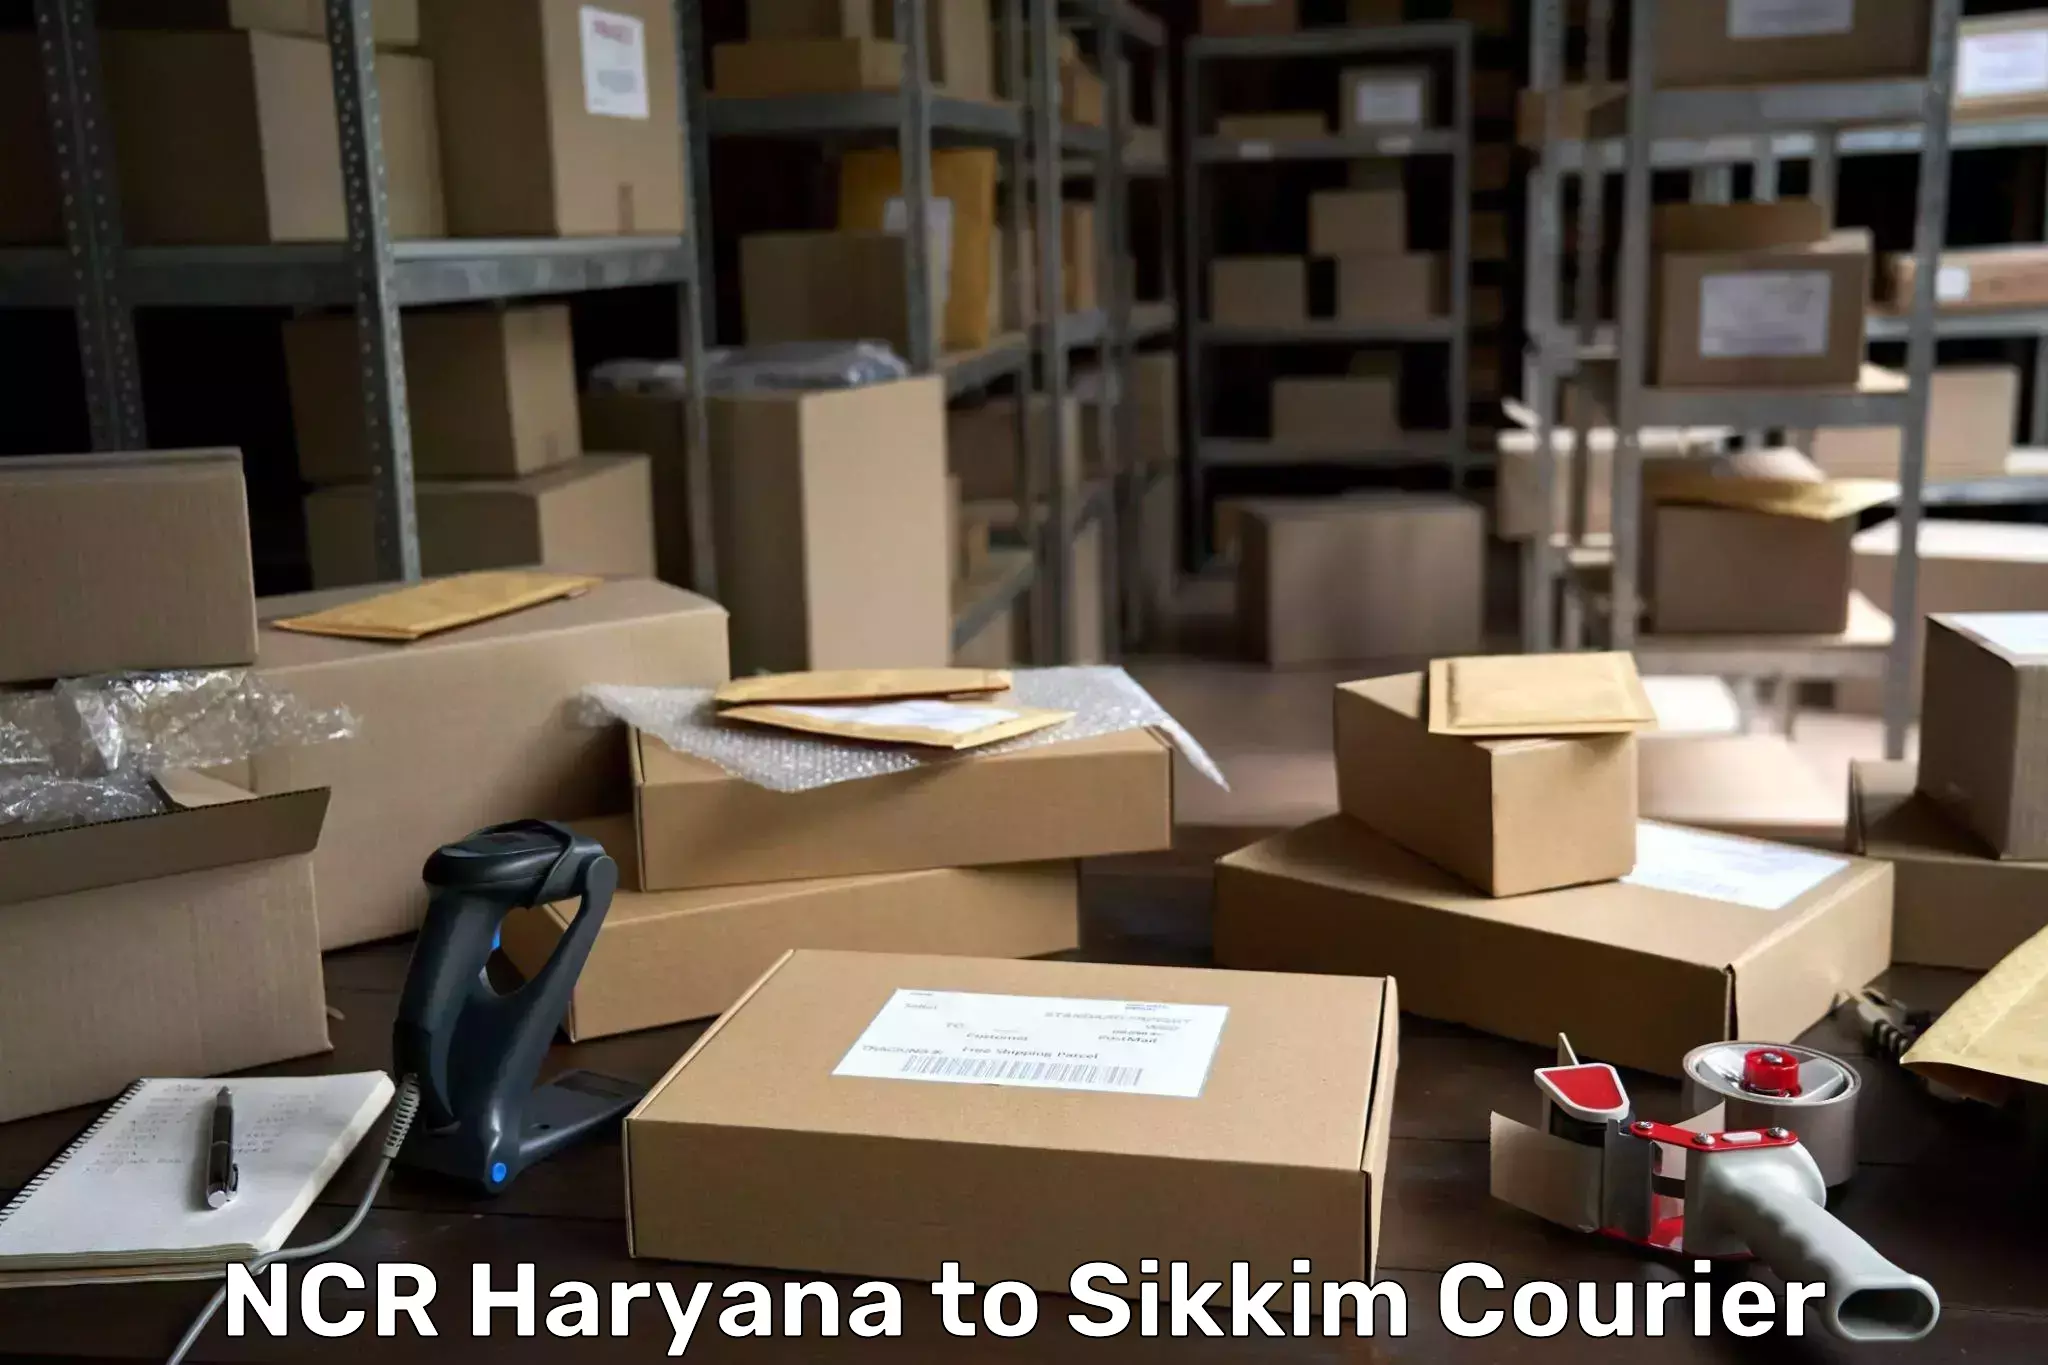 Express package services NCR Haryana to Sikkim